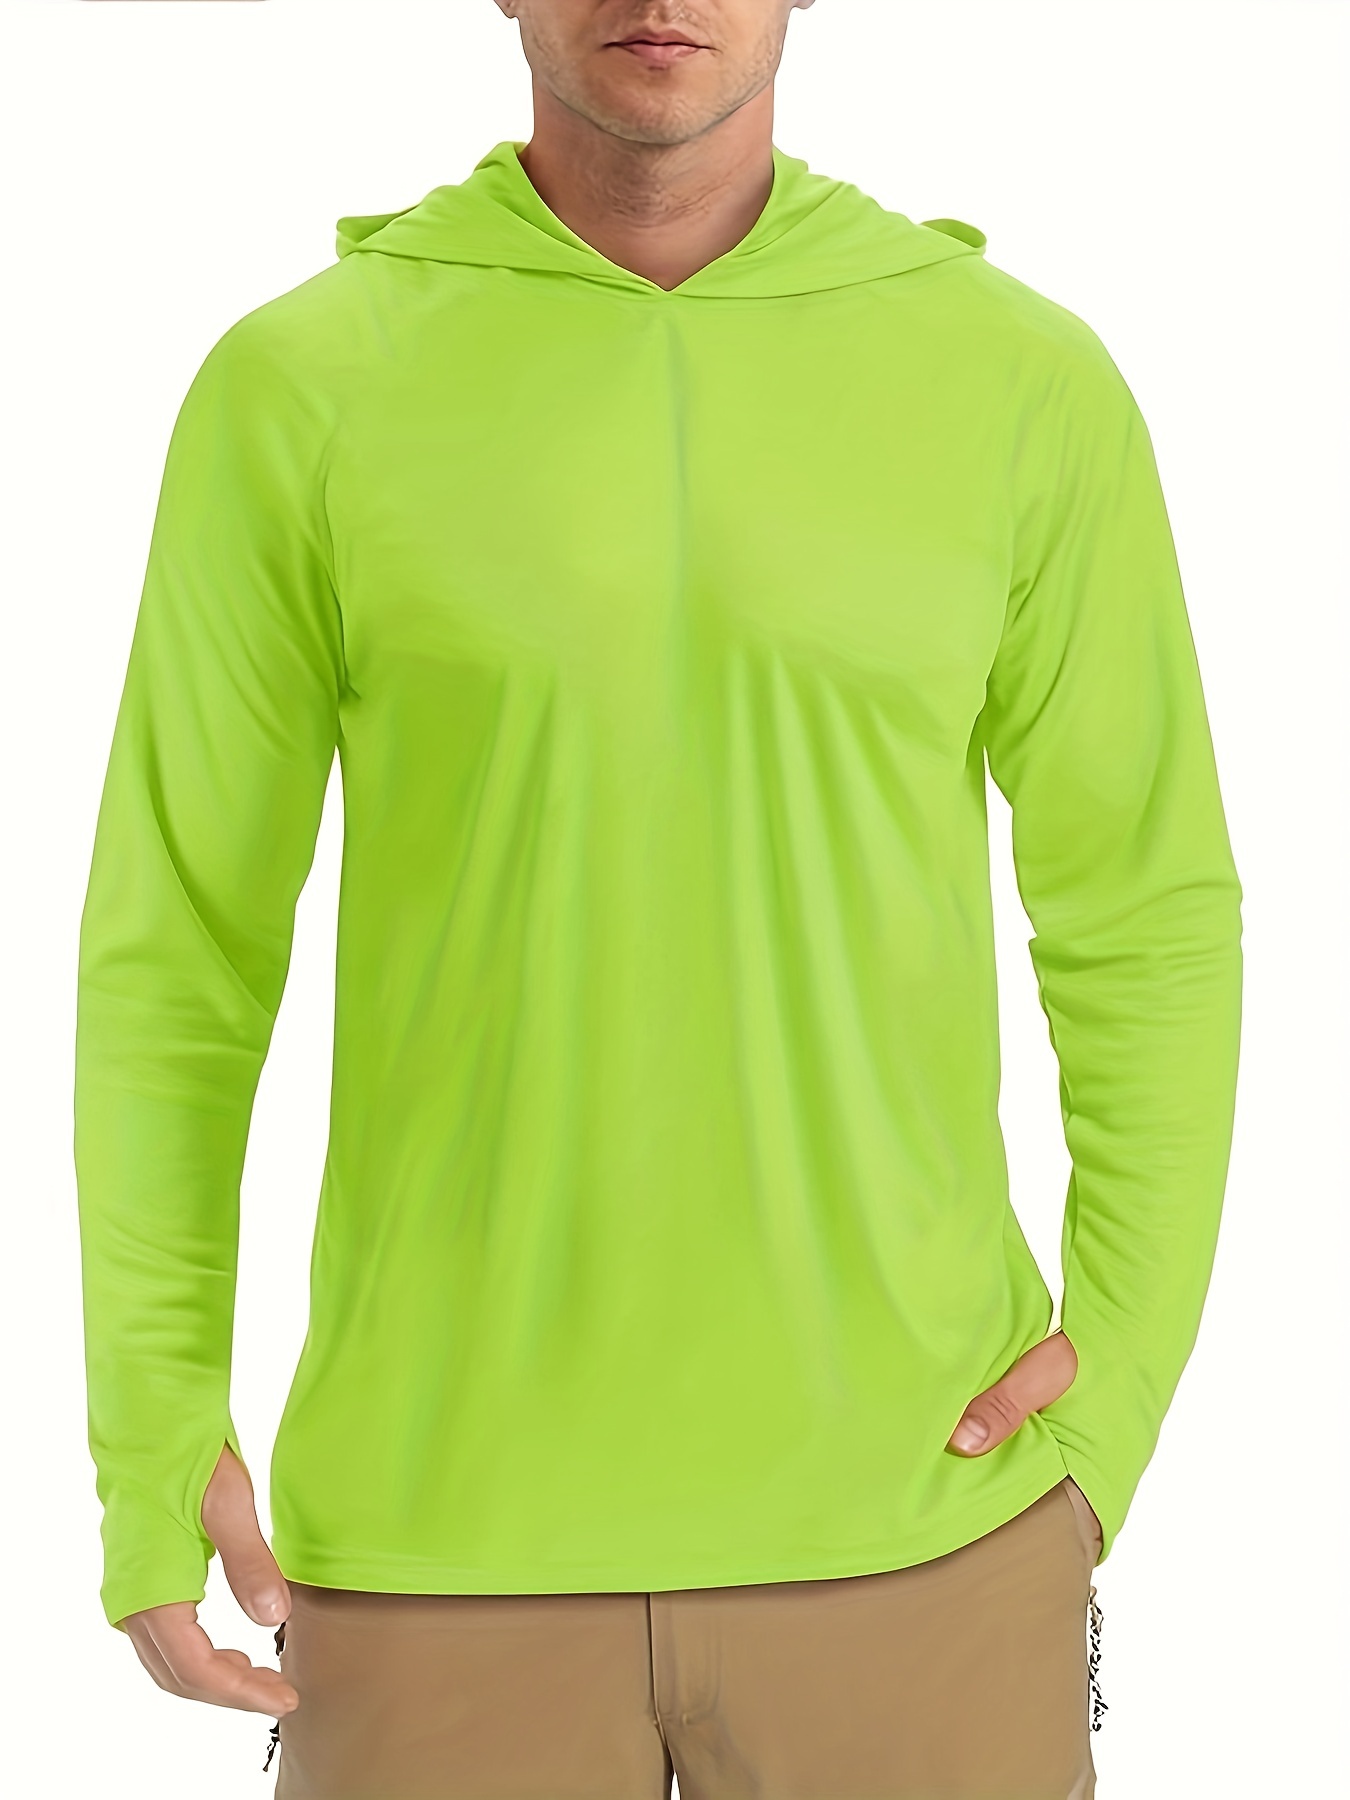 Solid Hooded Long Sleeve T-Shirt Tee, Men's Active Sun Protection Casual Comfy Shirts for Spring Summer Autumn Clothing Hoodies, Pullover Tops